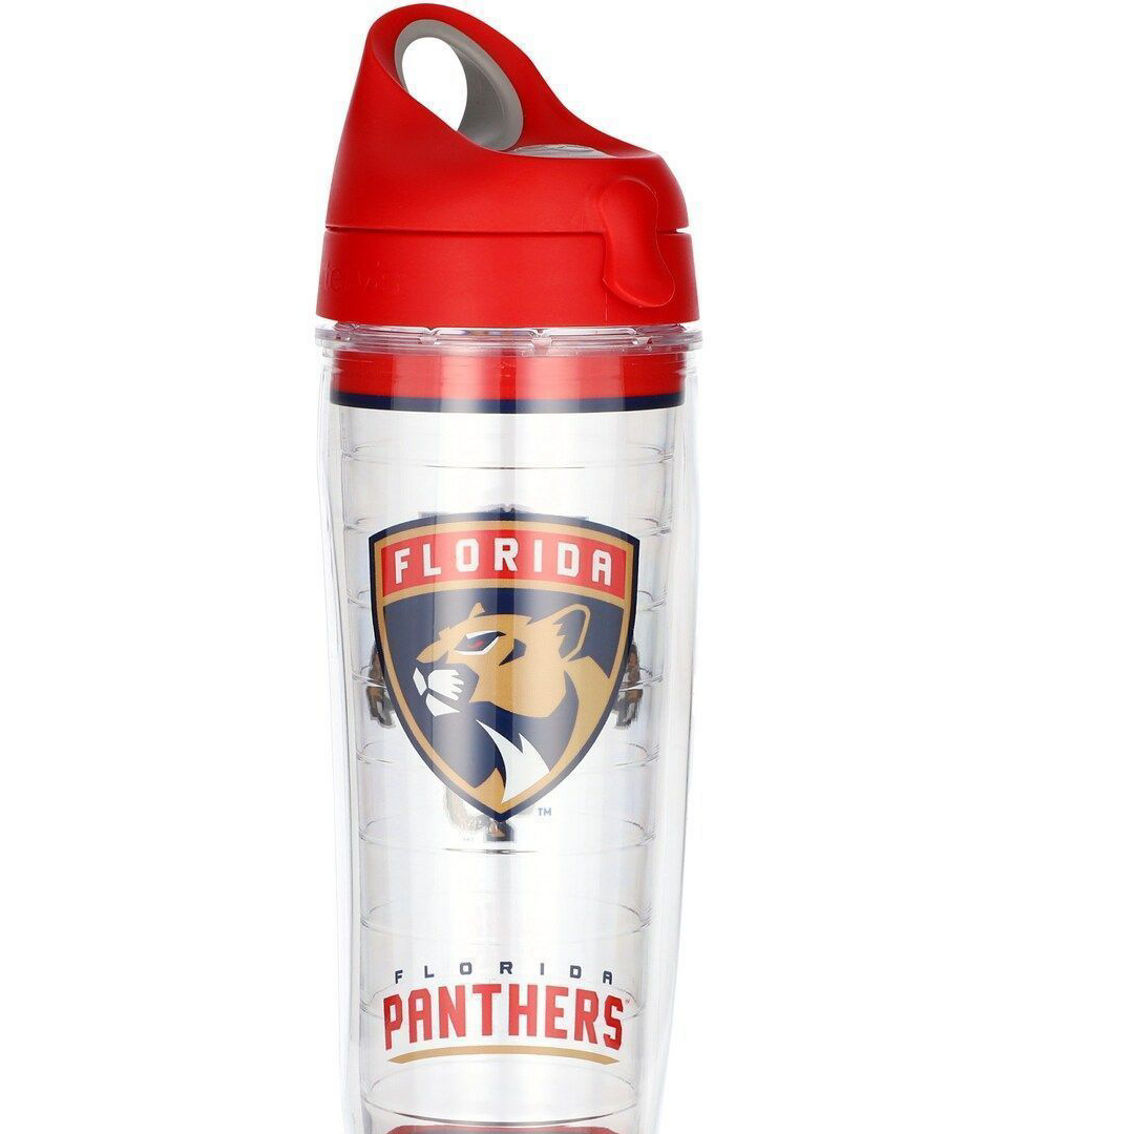 Tervis Florida Panthers 24oz. Tradition Classic Water Bottle - Image 2 of 3